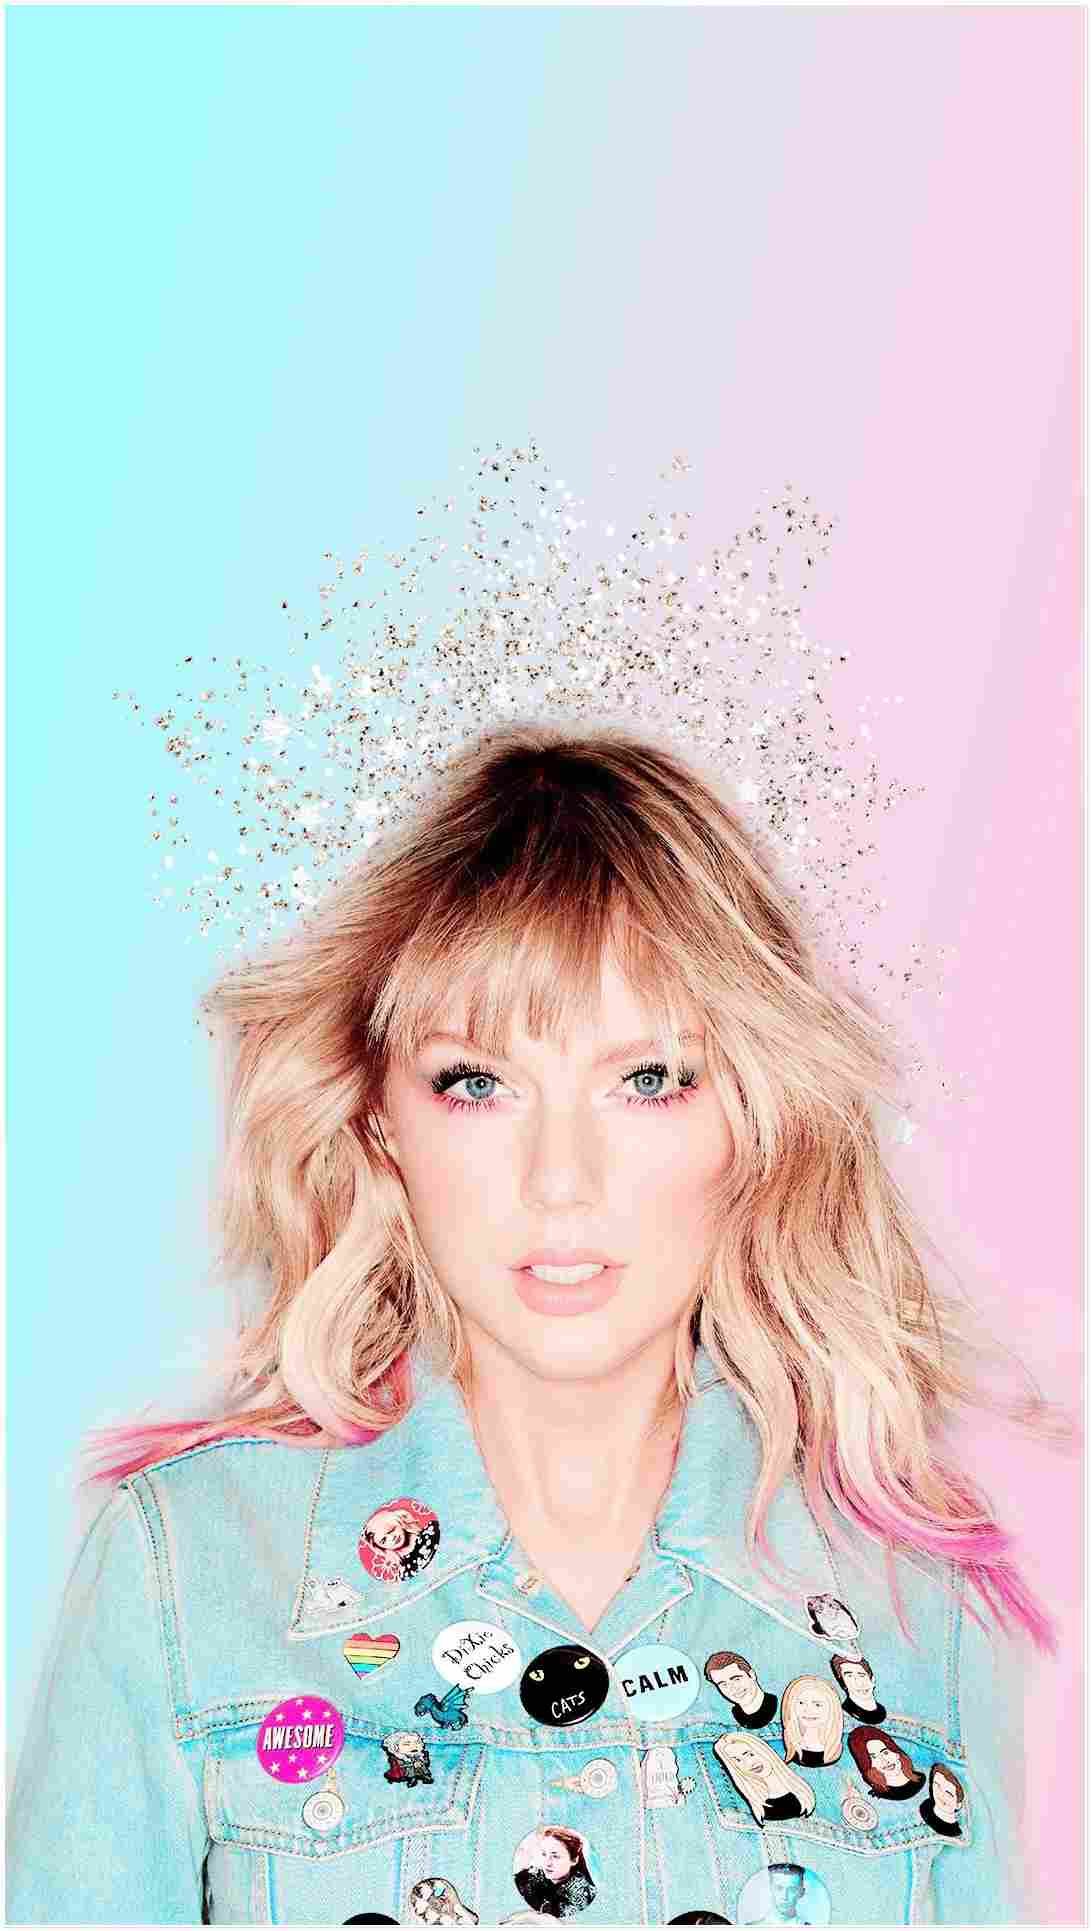 Taylor swift is wearing a denim jacket with pink hair and sparkly crown - Taylor Swift